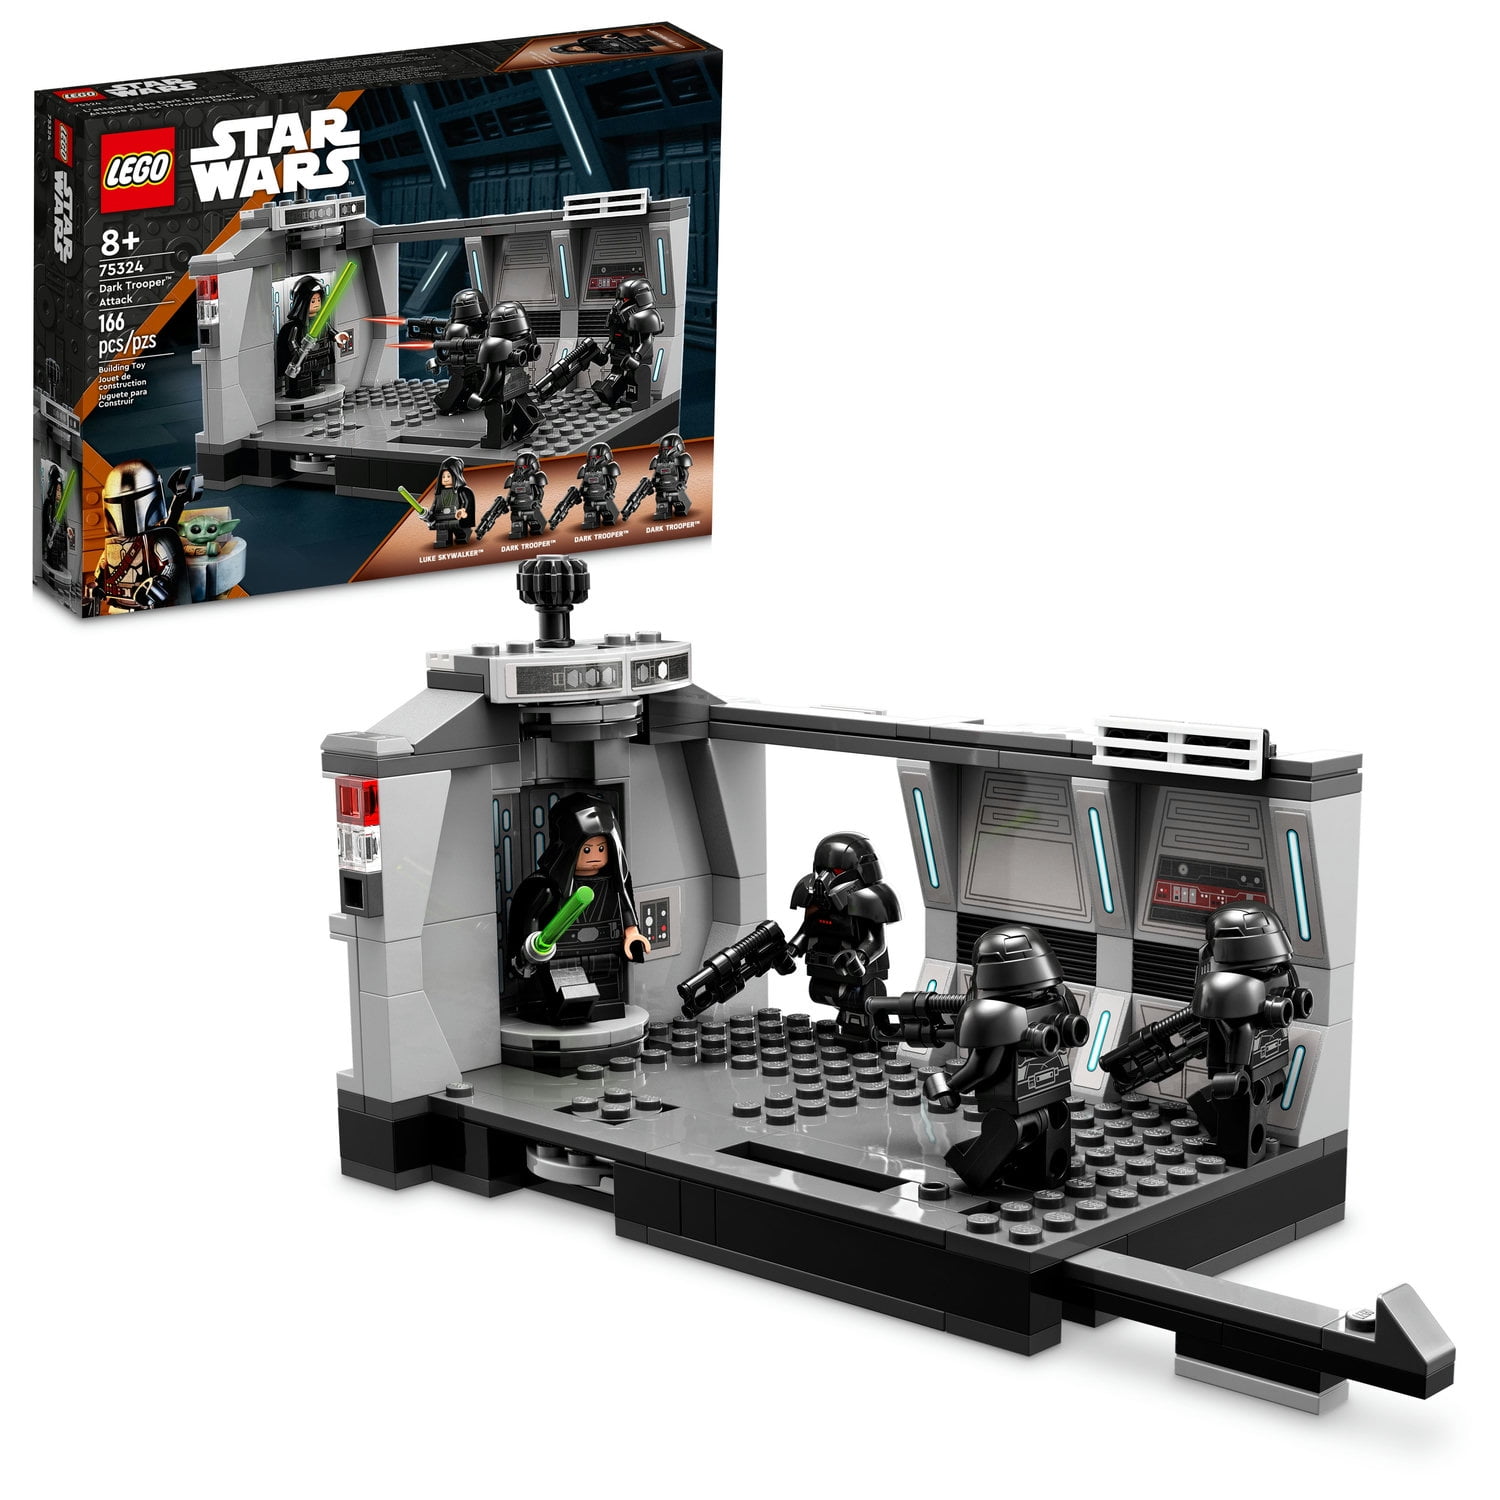 LEGO Star Wars Dark Trooper Attack 75324 Building Kit; Fun, Buildable Toy Playset for Kids Aged 8 and up (166 Pieces)